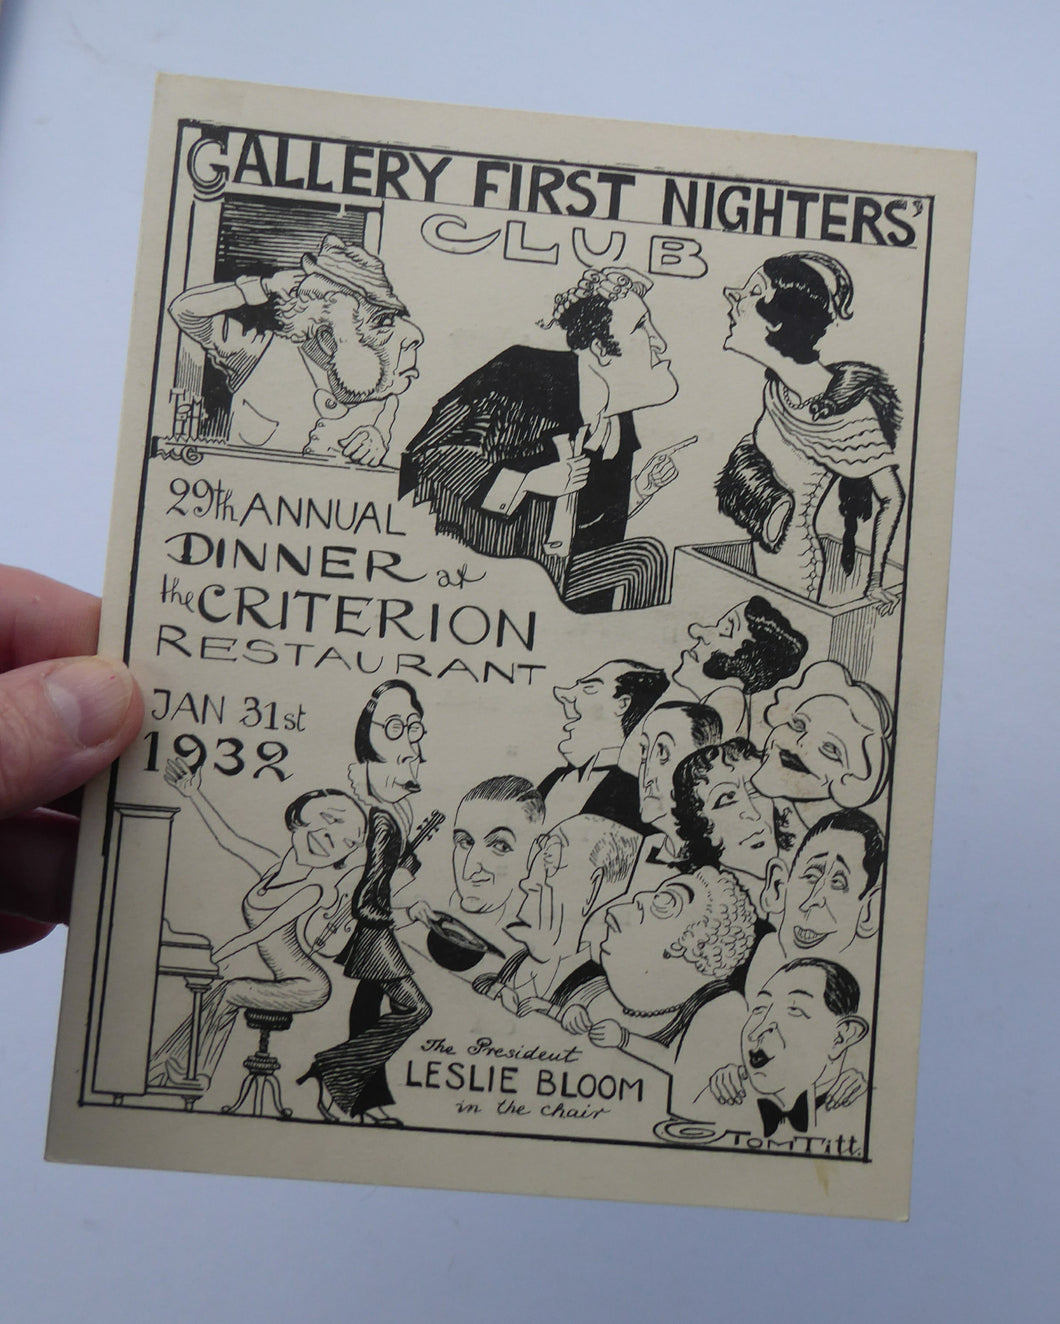 THEATRE HISTORY DOCUMENT:  The Gallery First Nighter's Club Annual Dinner Menu Card 1932